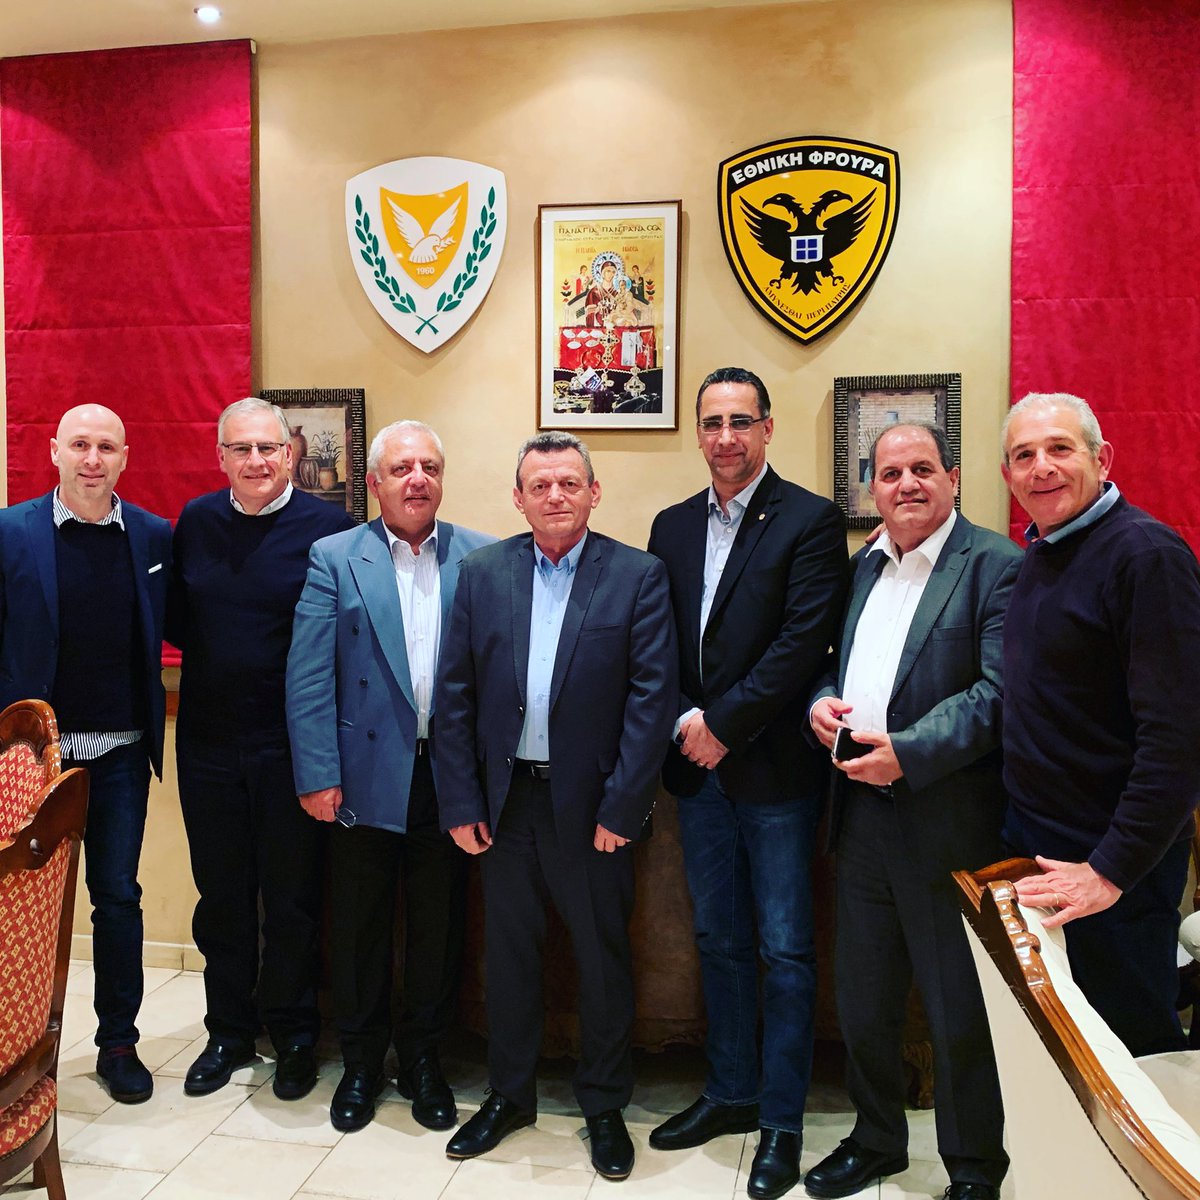 Farewell dinner with Brother Lt General Leontaris. Thank you for your service! @OrderOfAHEPA @EthnikiFroura @ileontaris @ahepacyprus